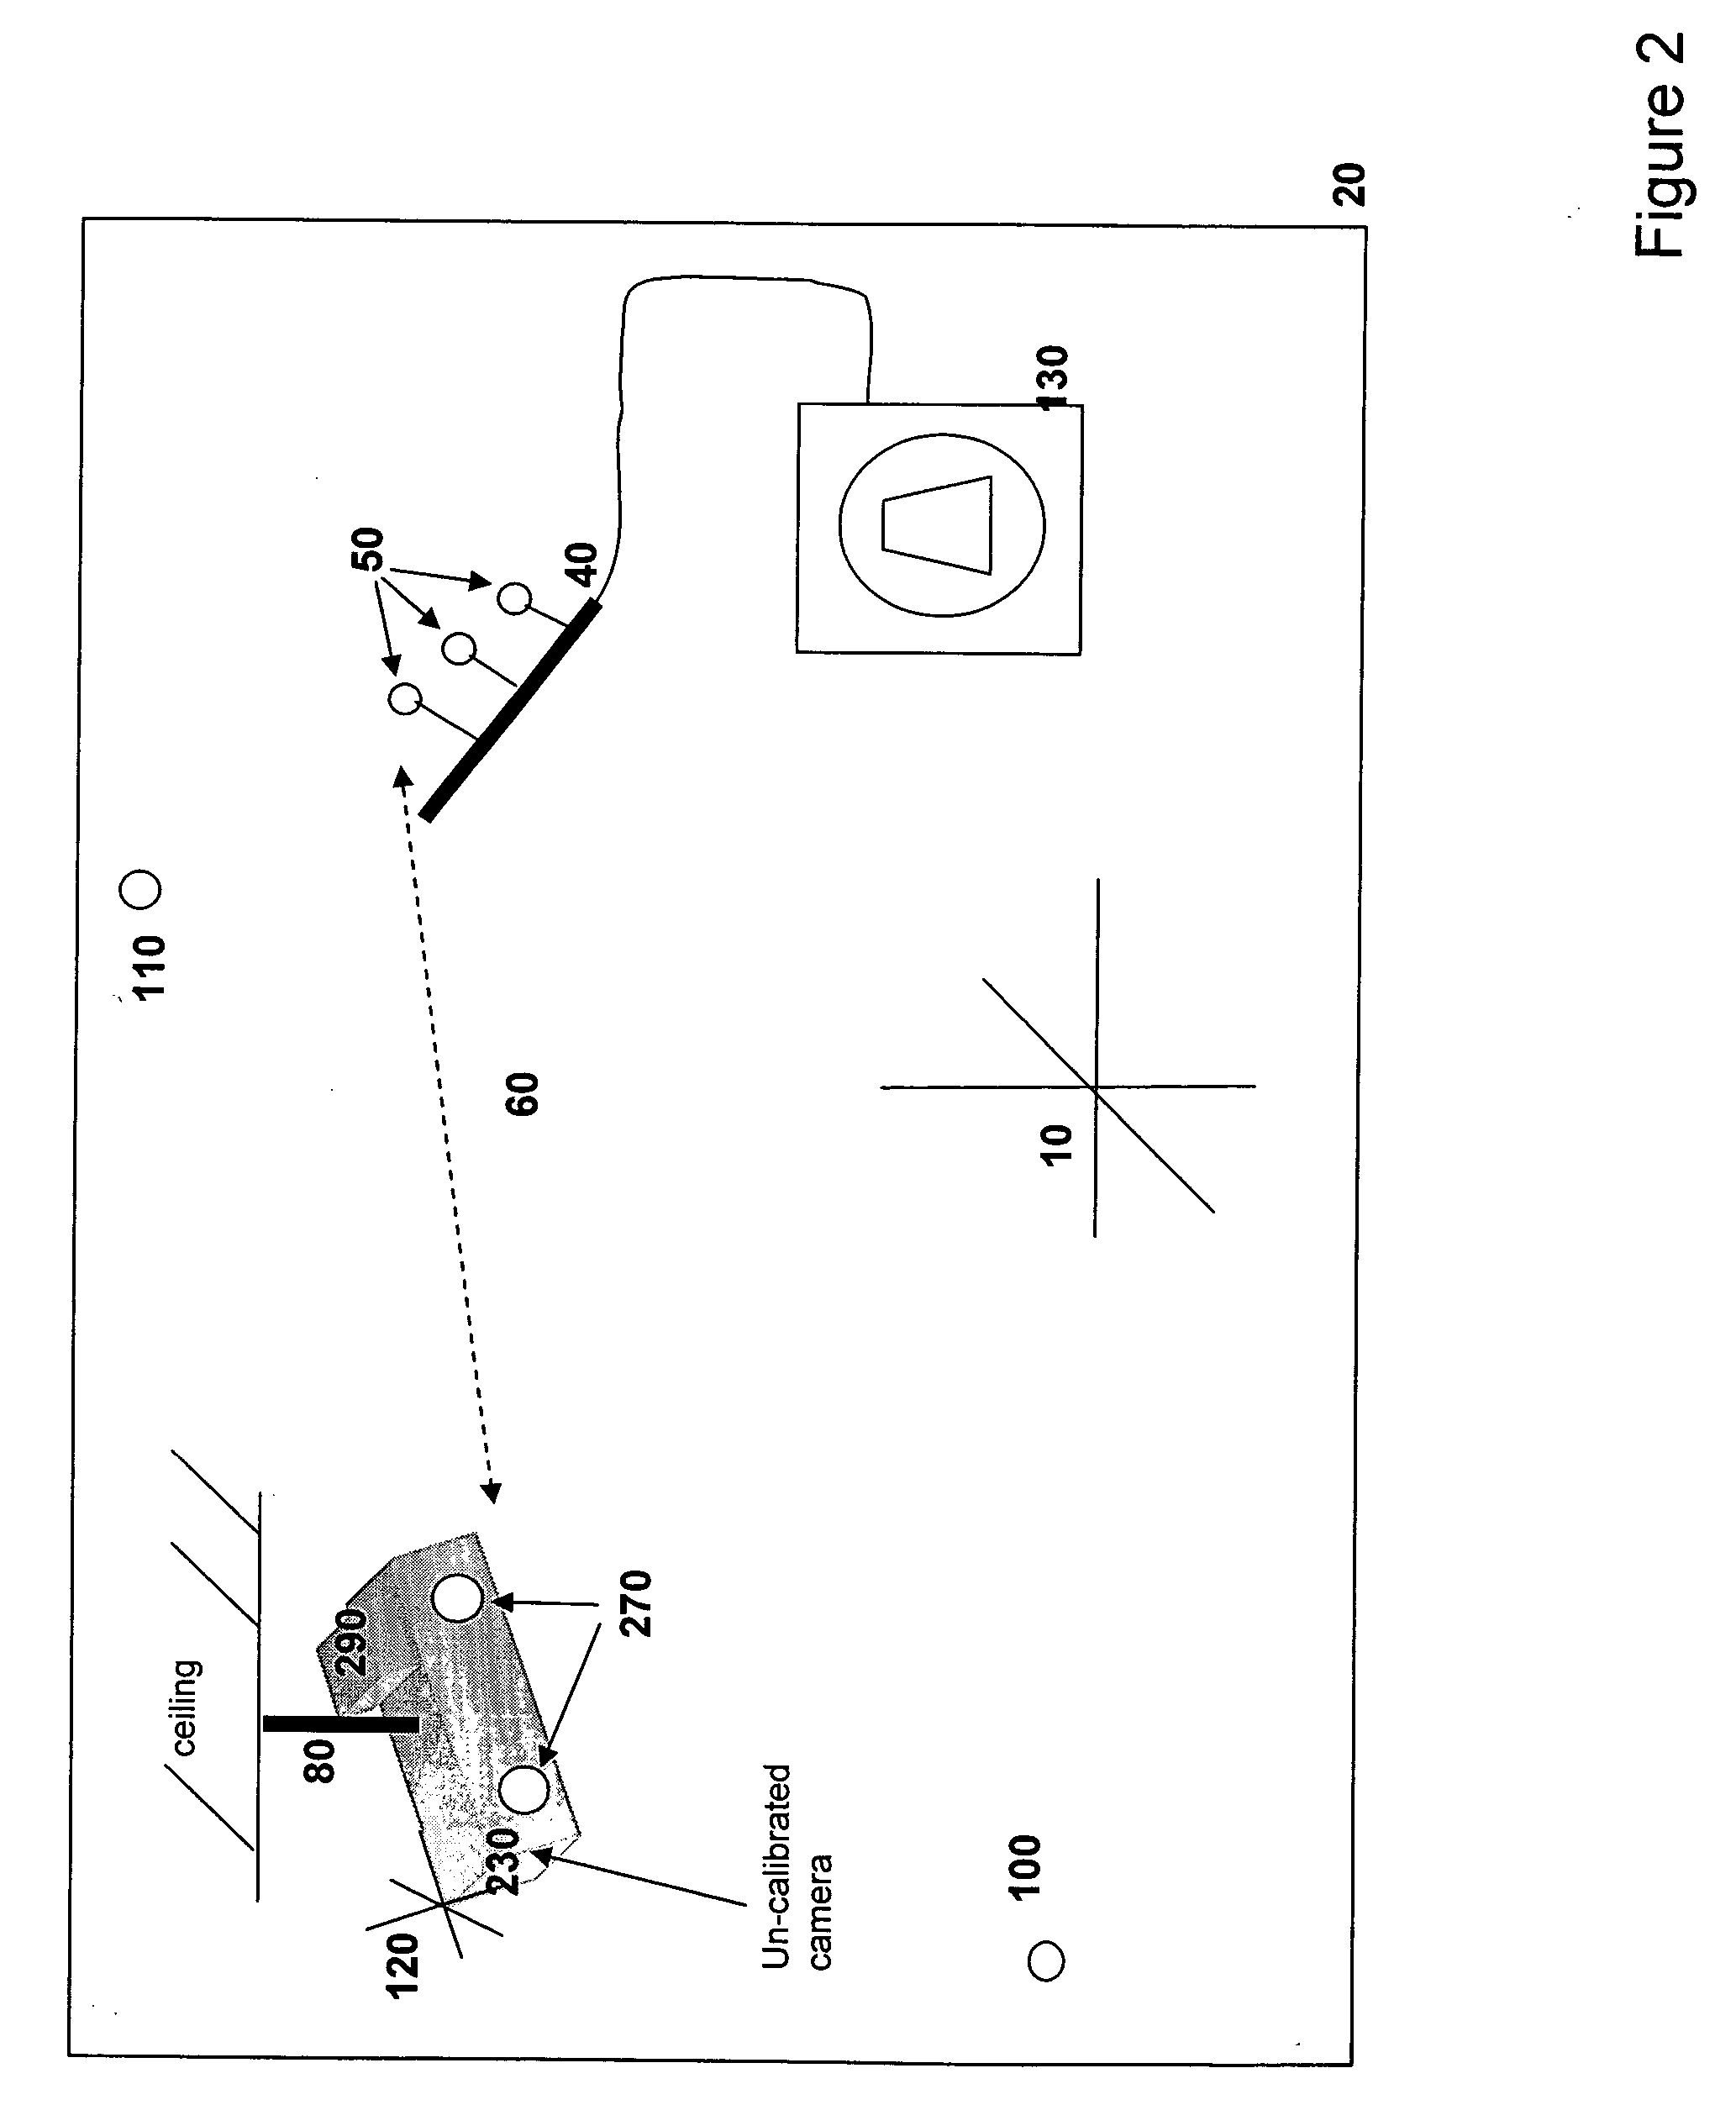 System and method for detecting drifts in calibrated tracking systems